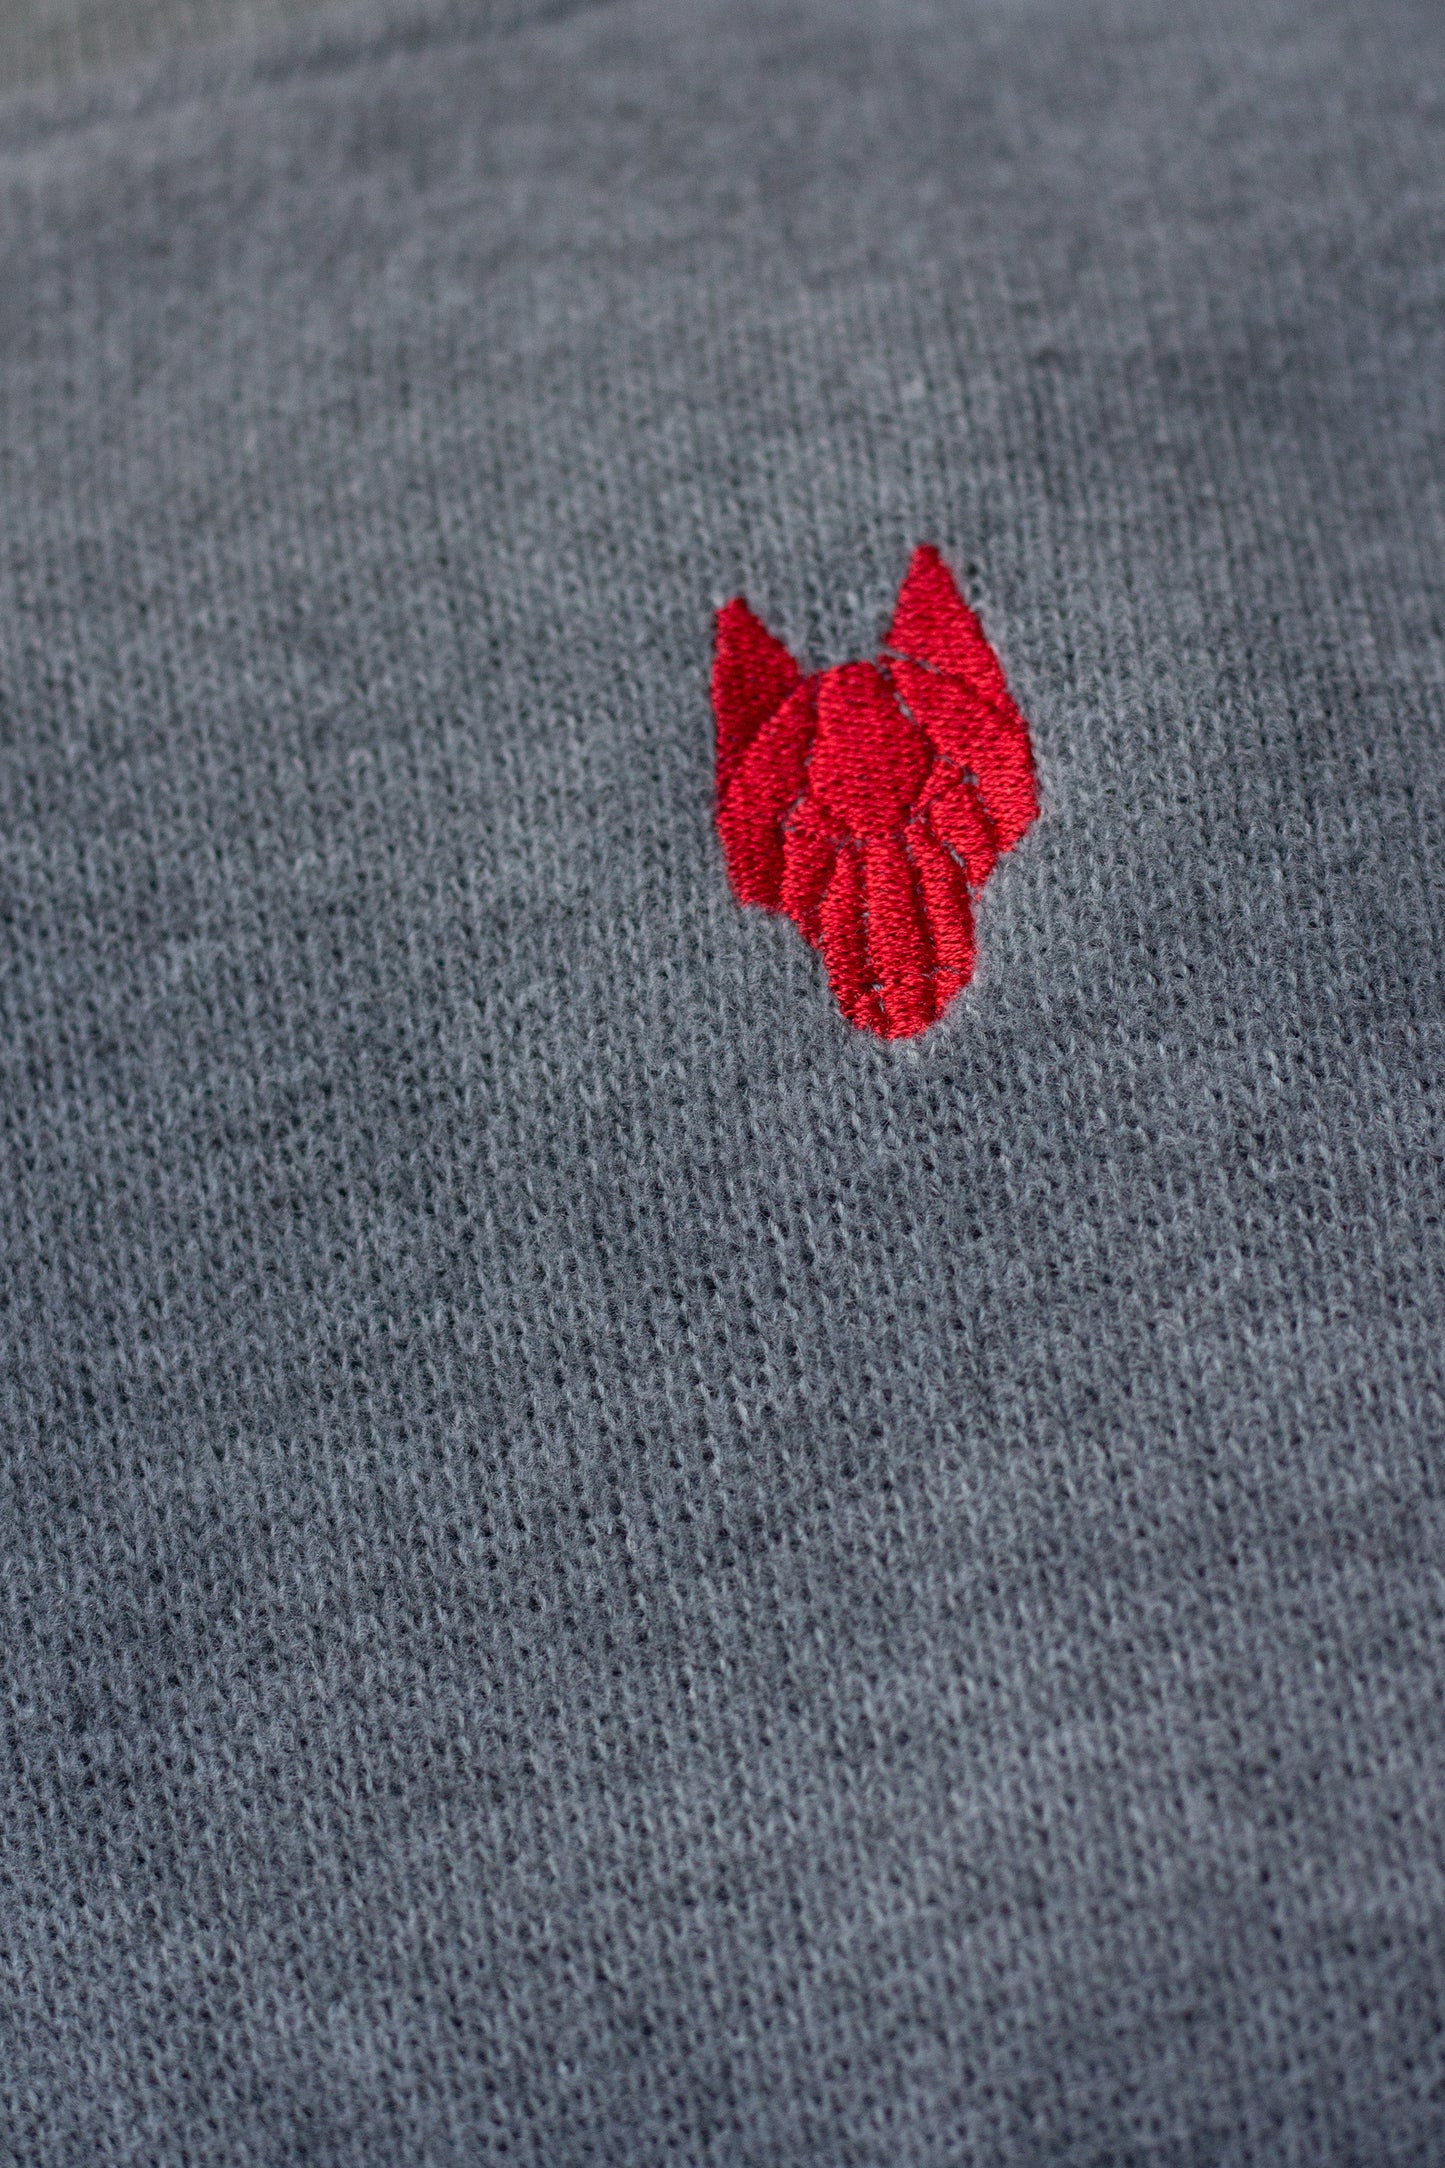 Kid's One Wolf knitted sweater grey, red logo